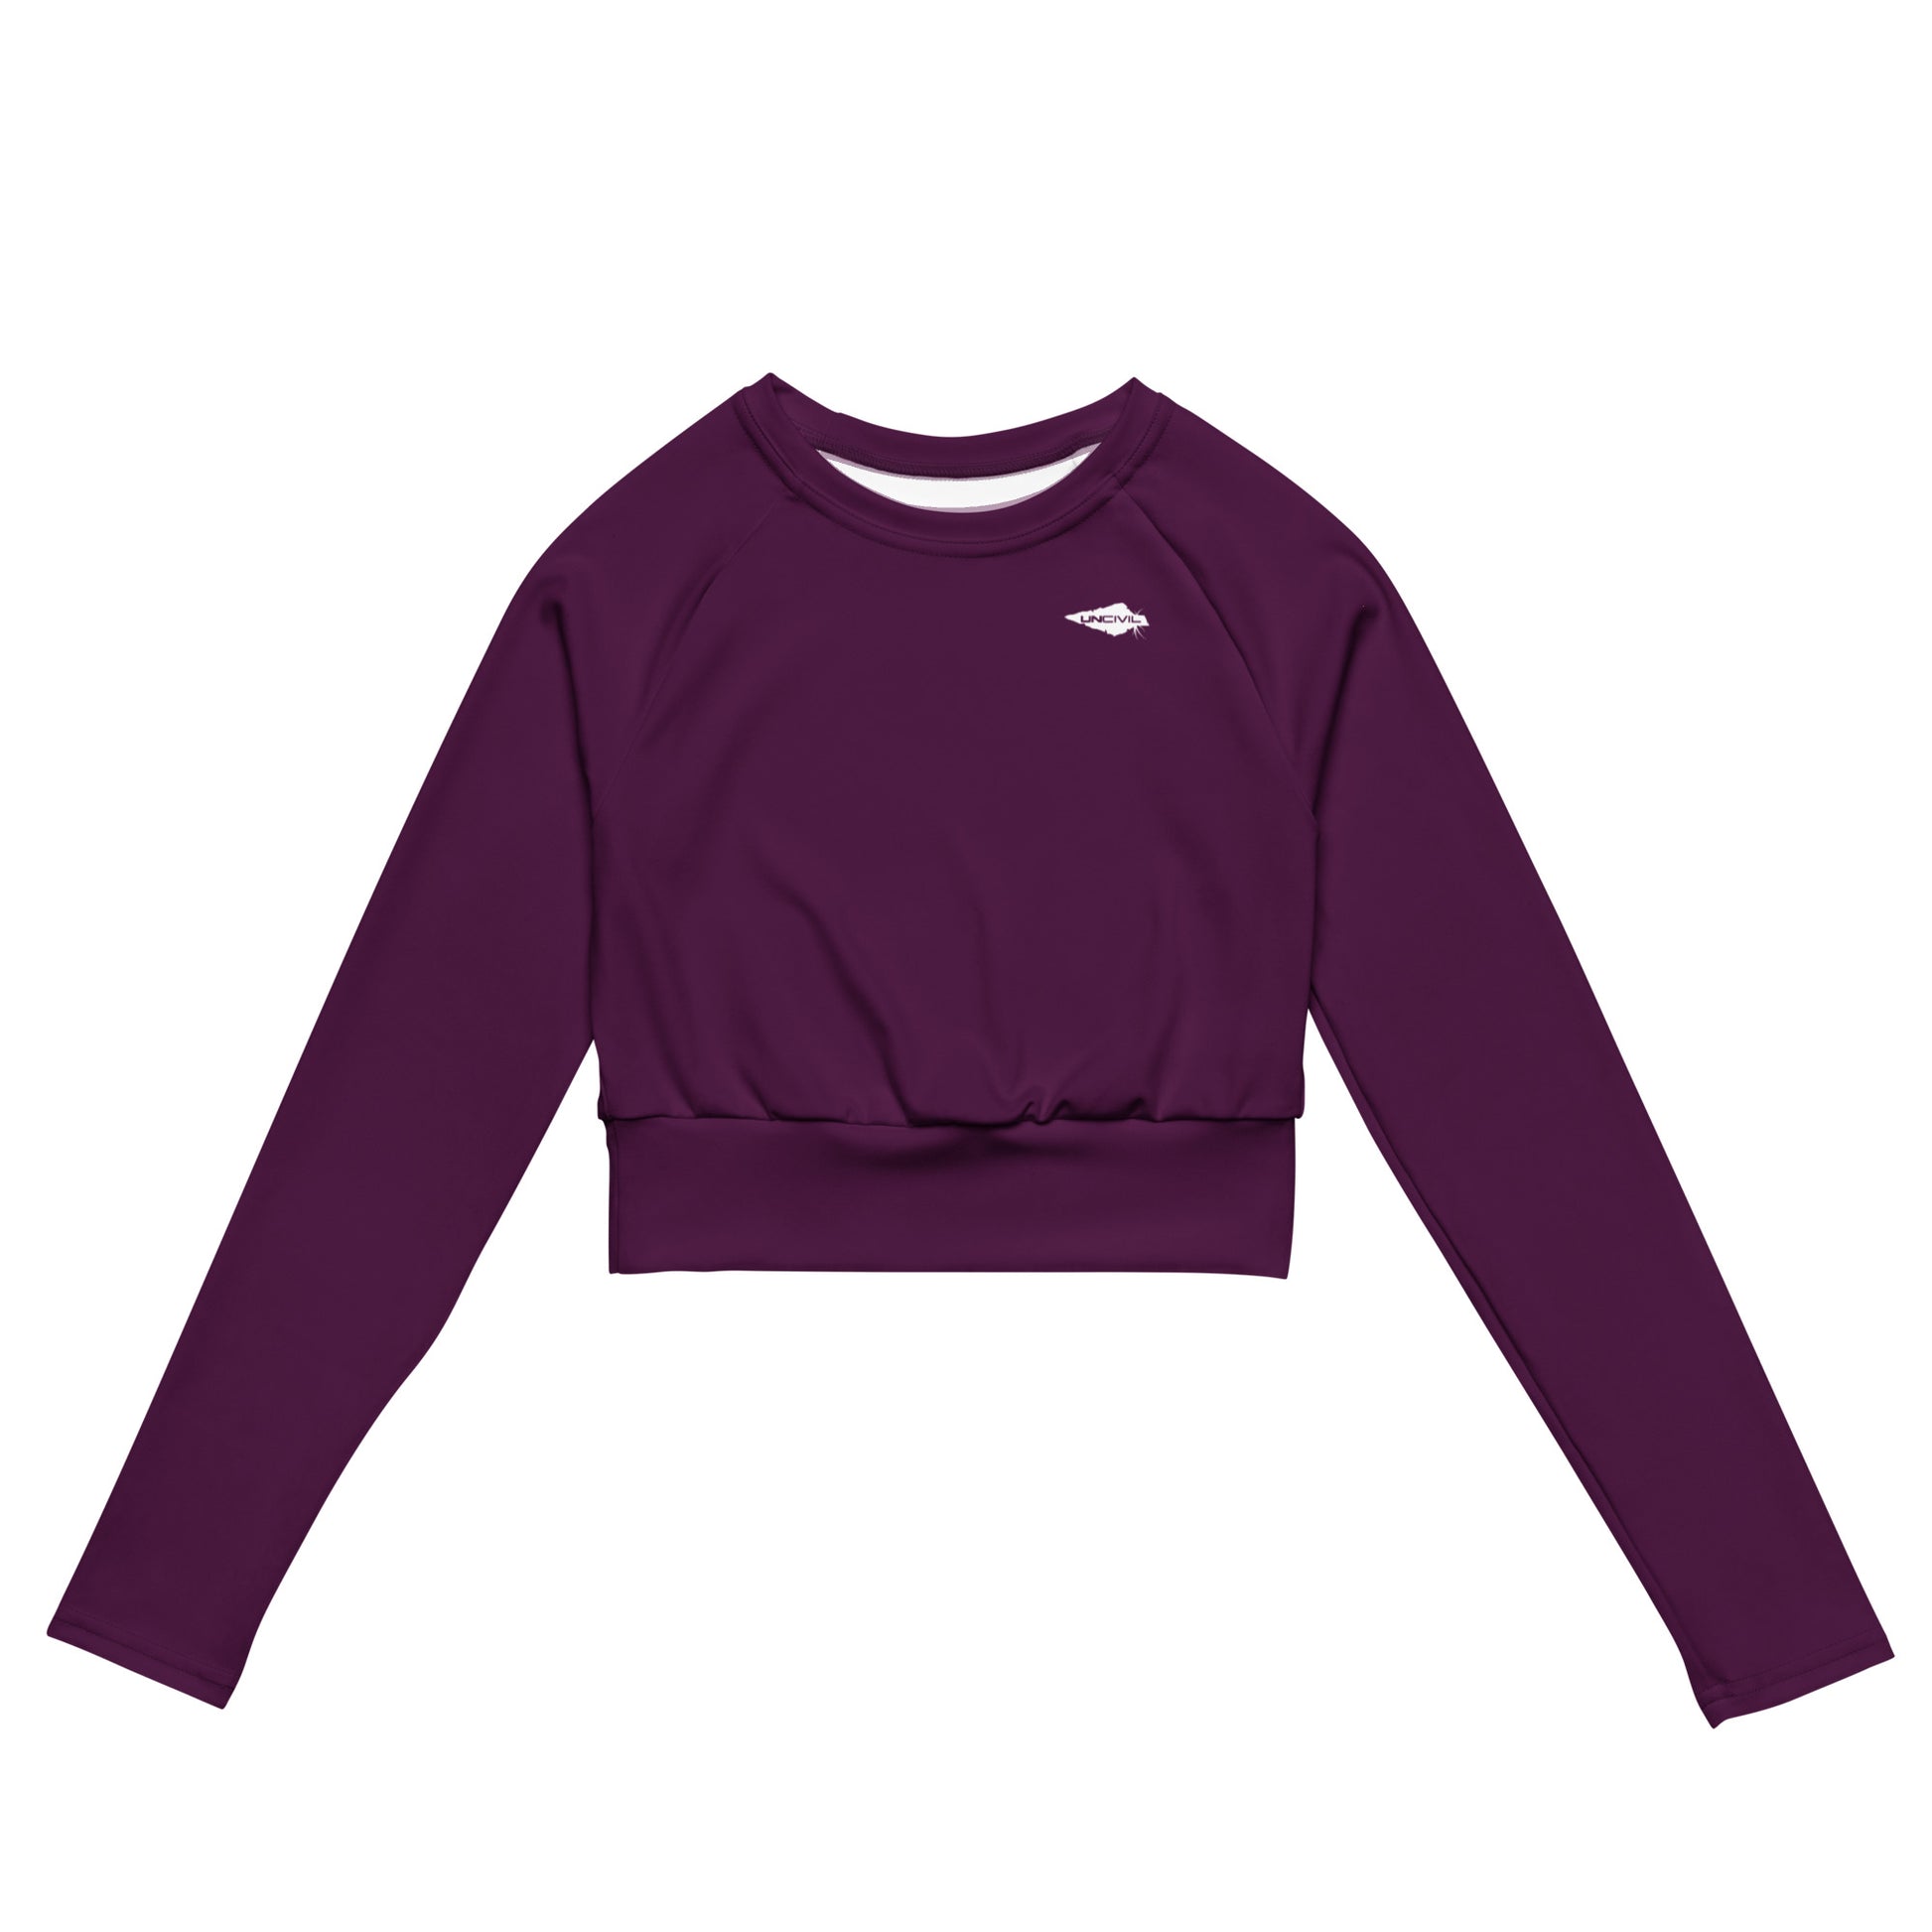 Dark Fuchsia long-sleeve crop top for women is made of recycled polyester and elastane, making it an eco-friendly choice for swimming, sports, or athleisure. UPF 50+.